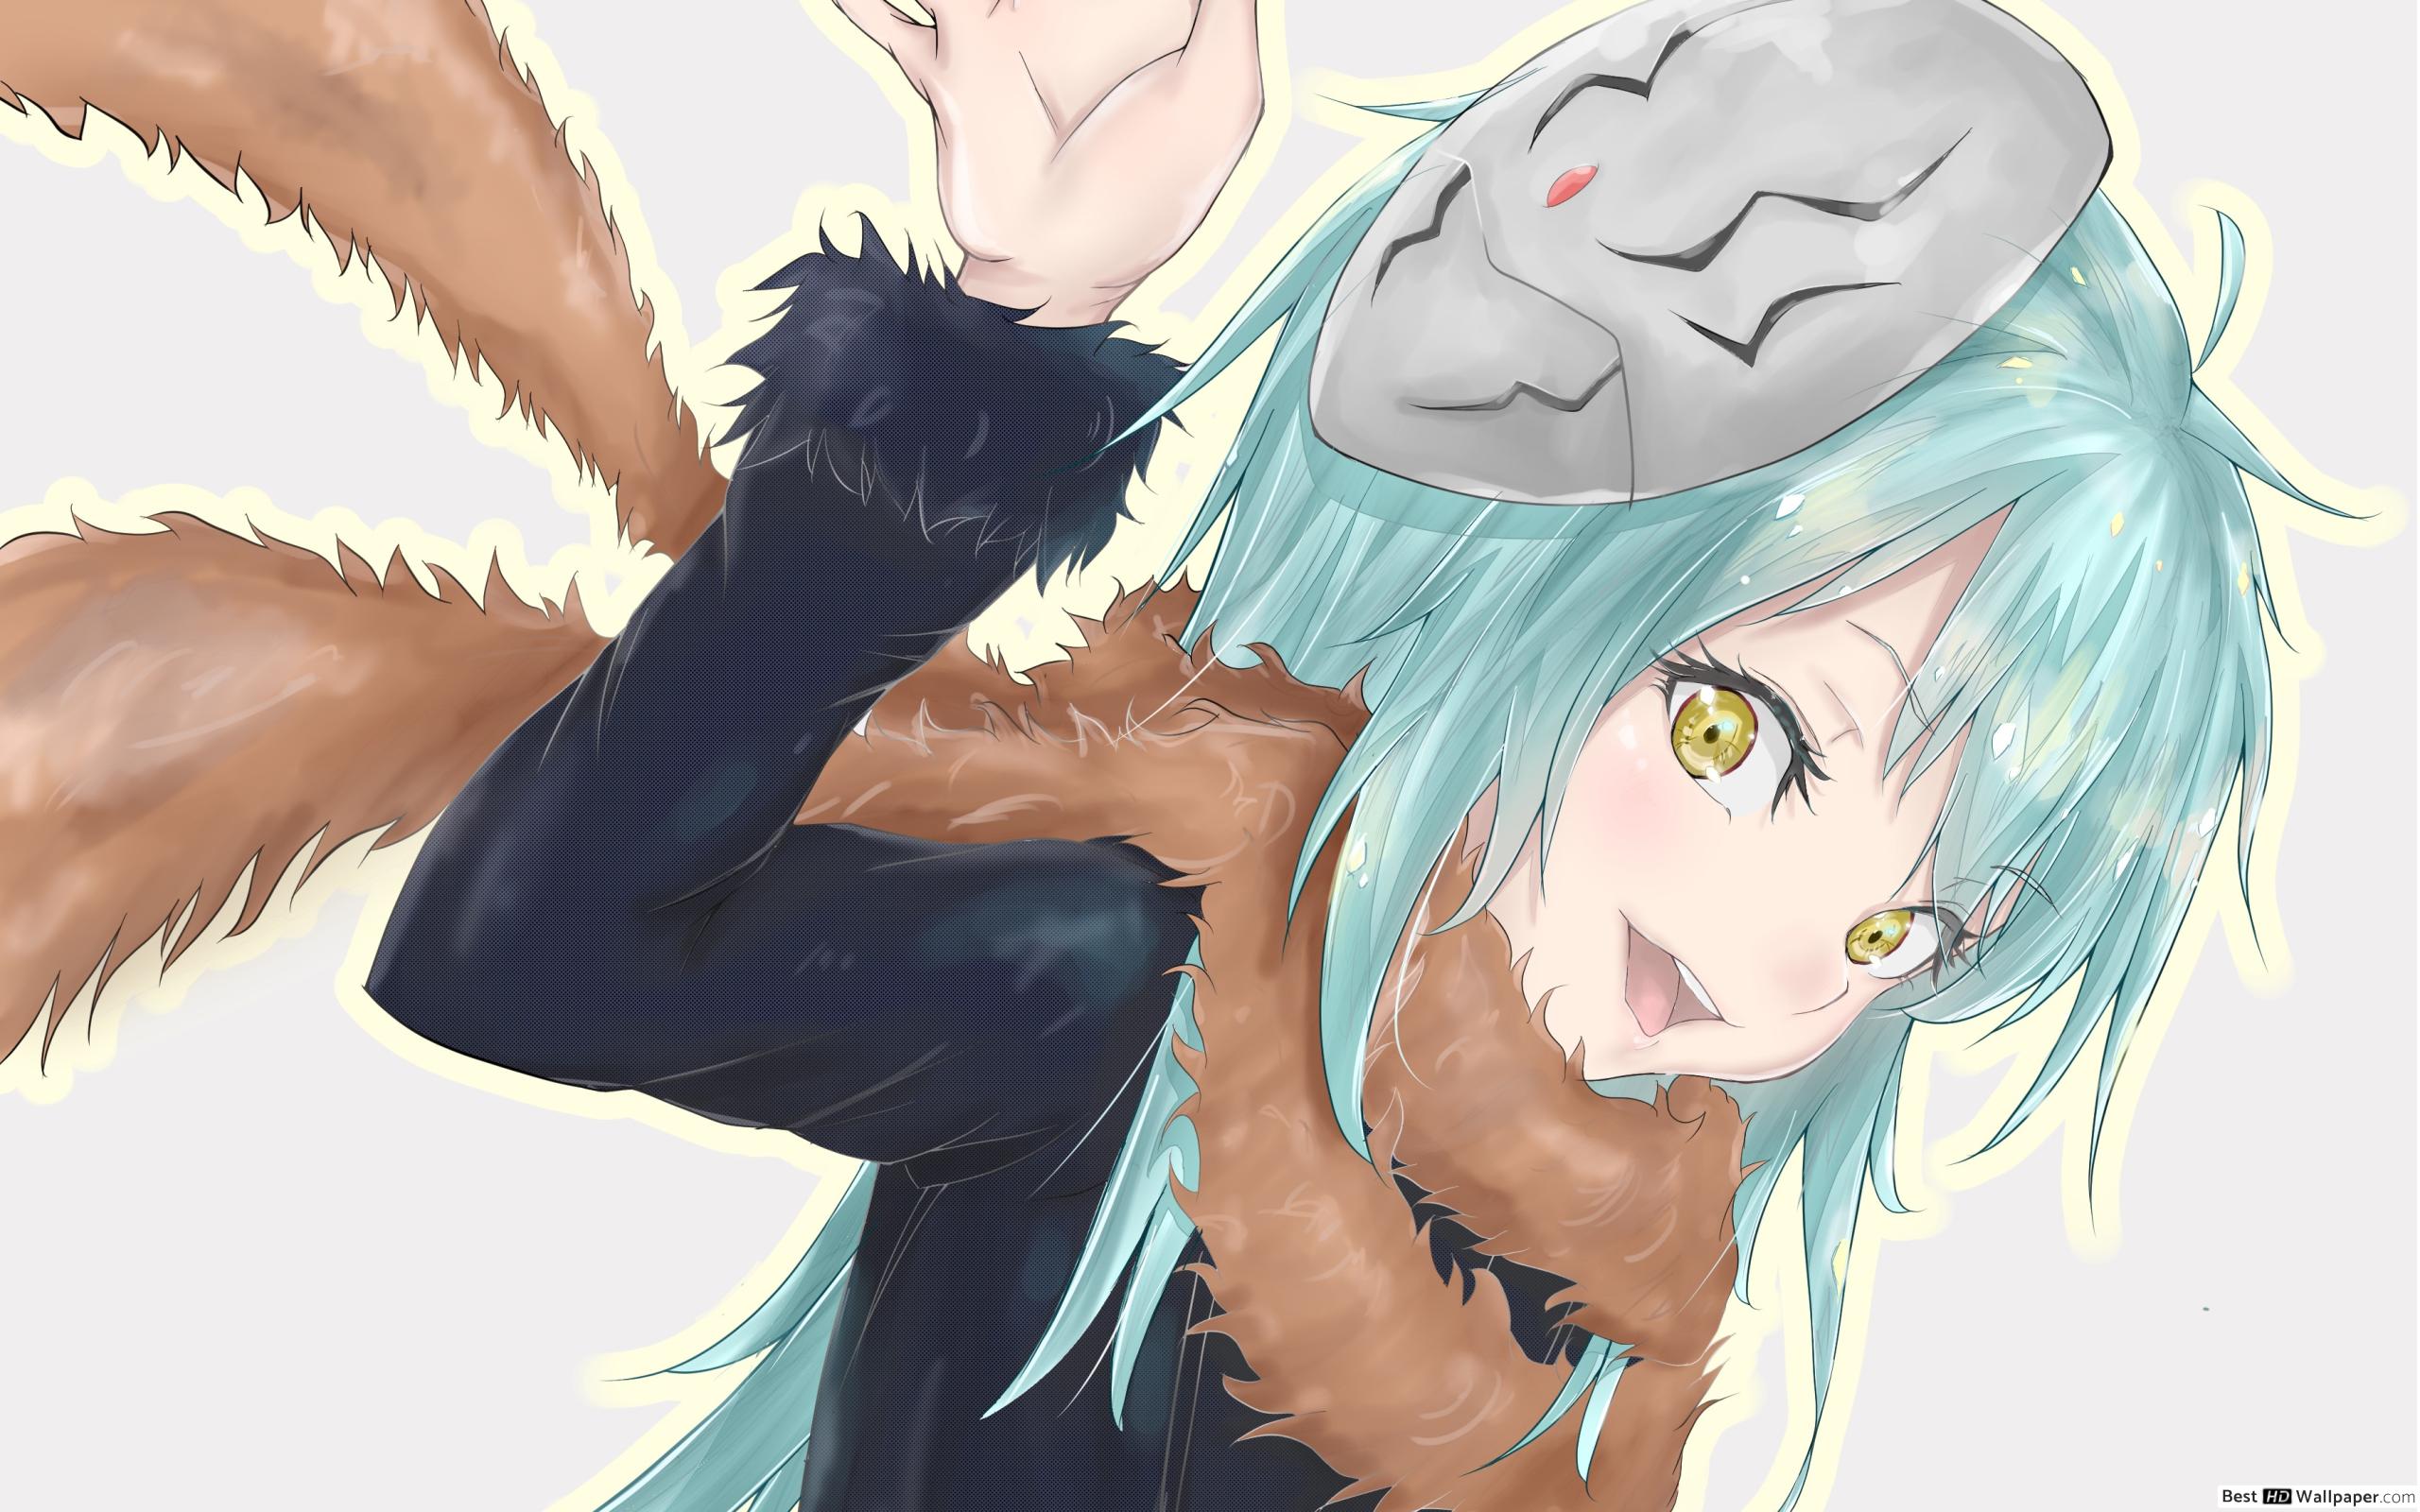 That Time I Got Reincarnated As A Slime Tempest, Great Demon Lord HD wallpaper download